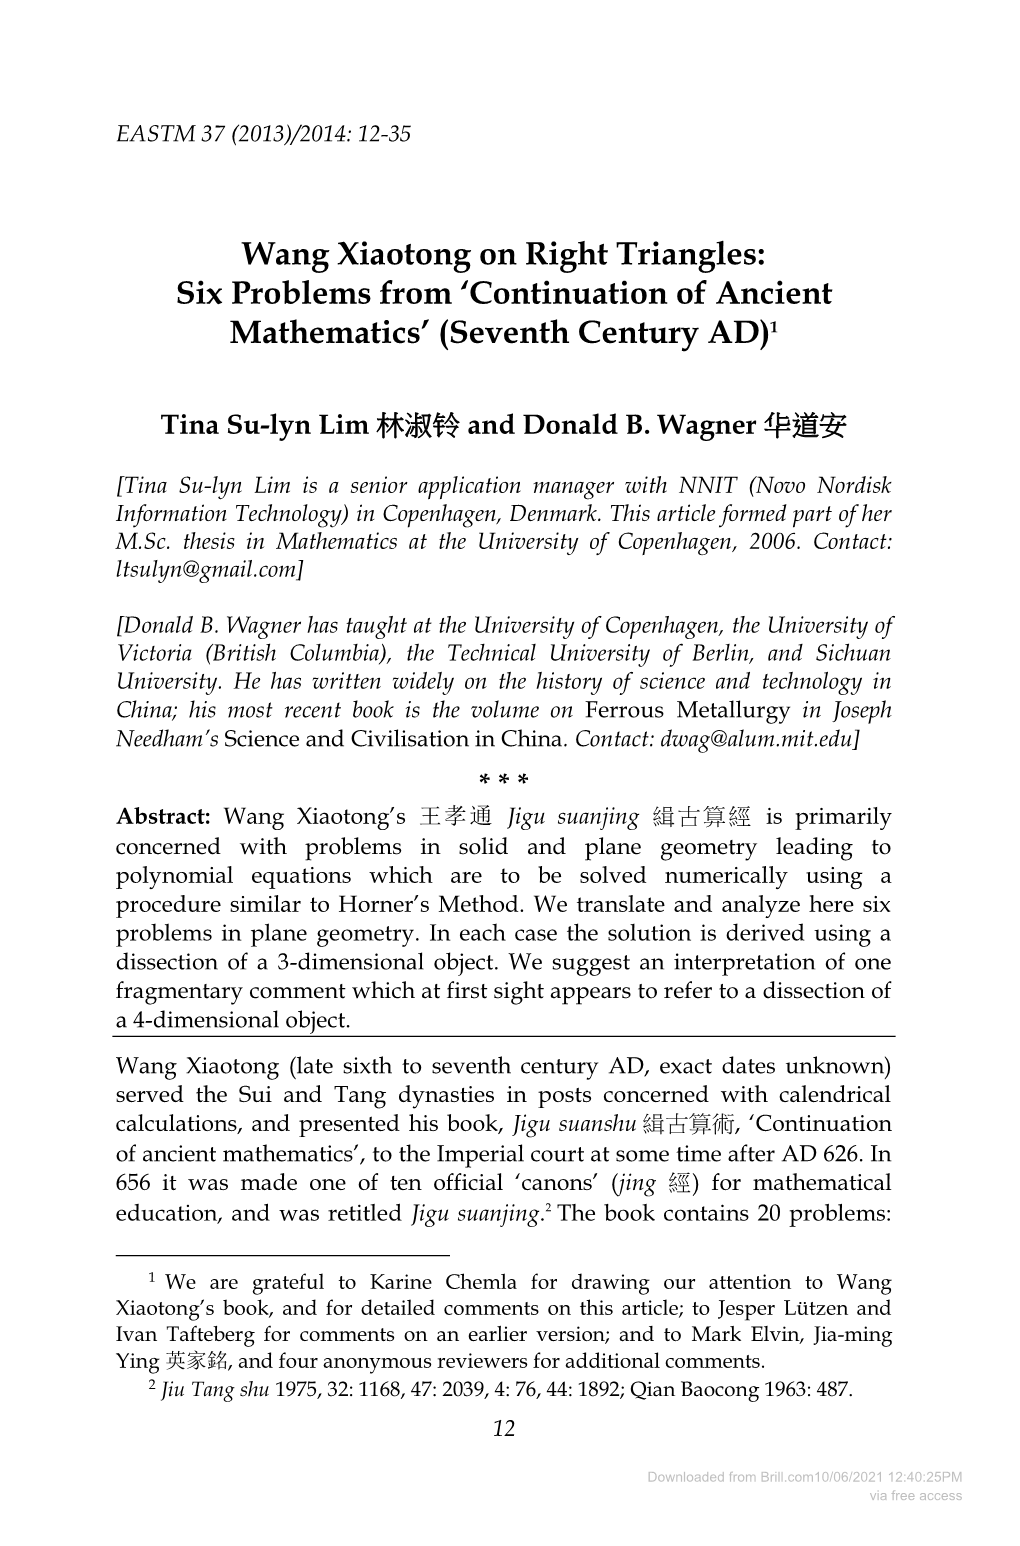 Wang Xiaotong on Right Triangles: Six Problems from ‘Continuation of Ancient Mathematics’ (Seventh Century AD)1